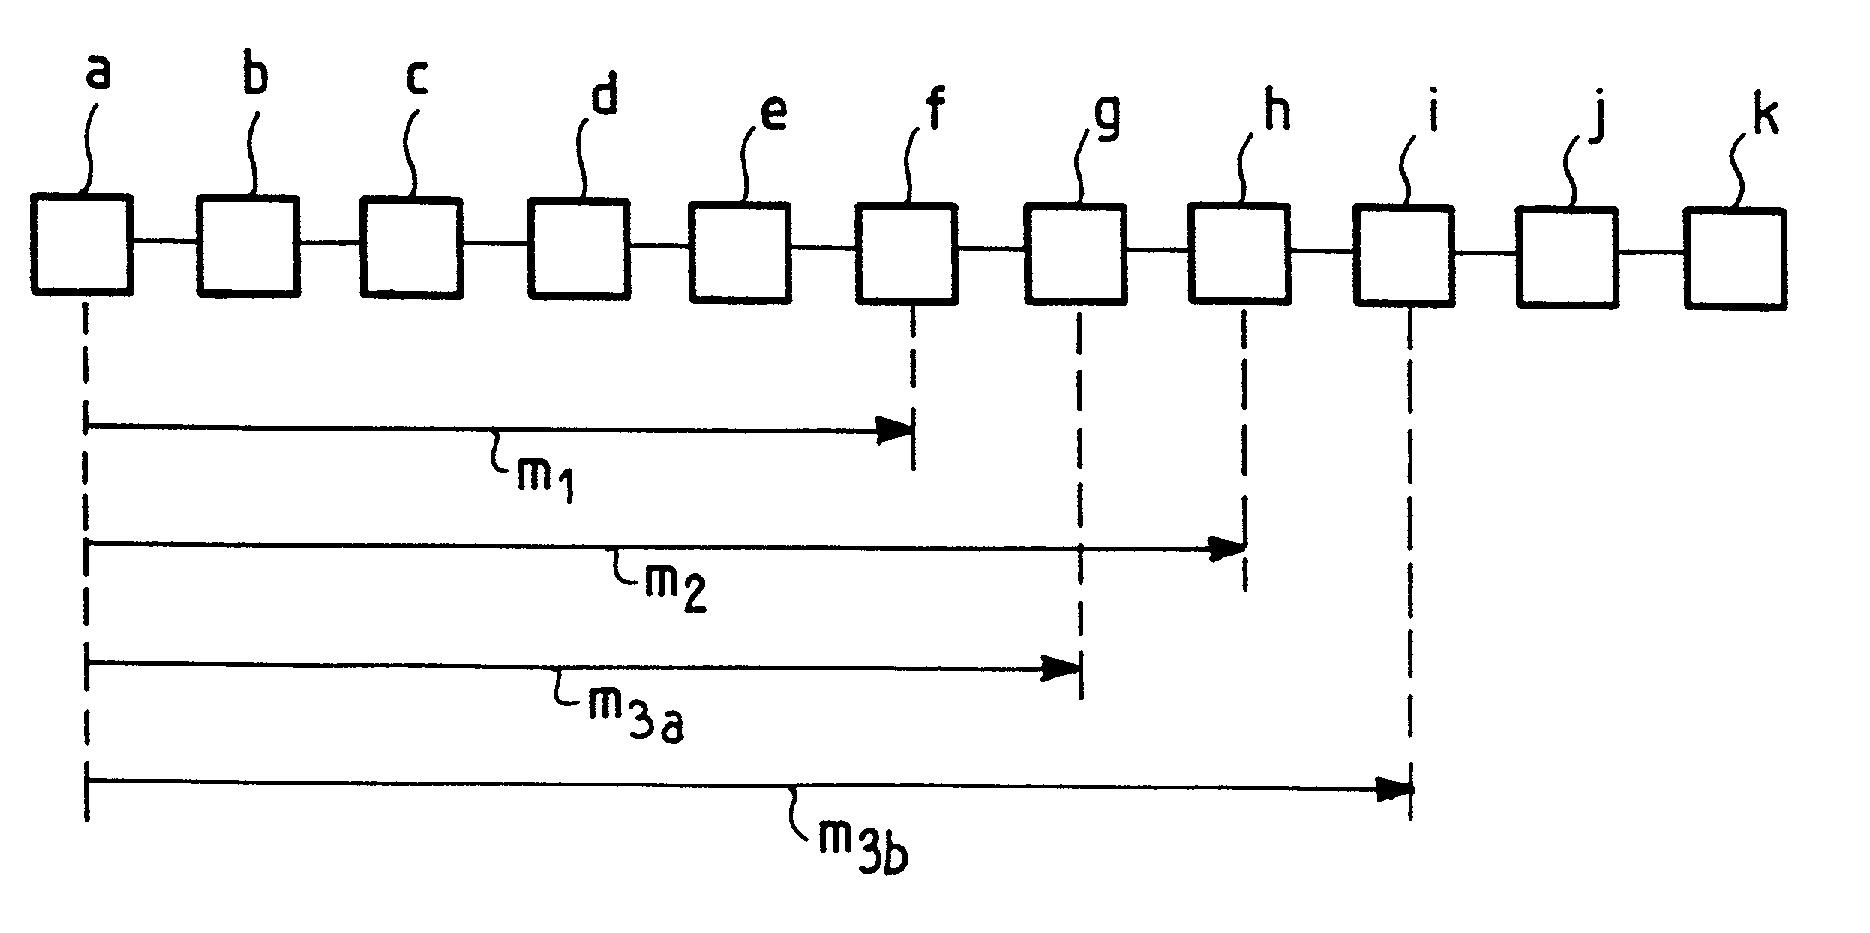 Dichotomy-based method of tracing a route between two nodes of a data network